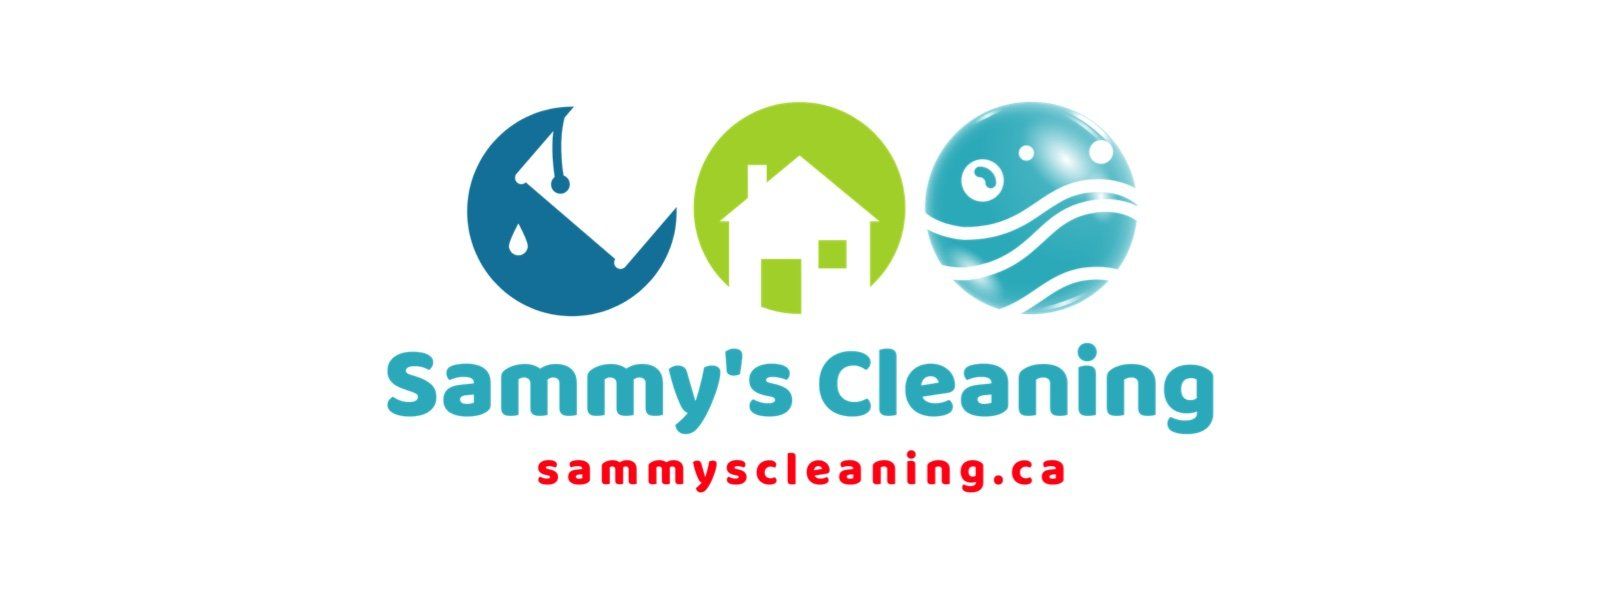 A logo for sammy 's cleaning shows a house and water